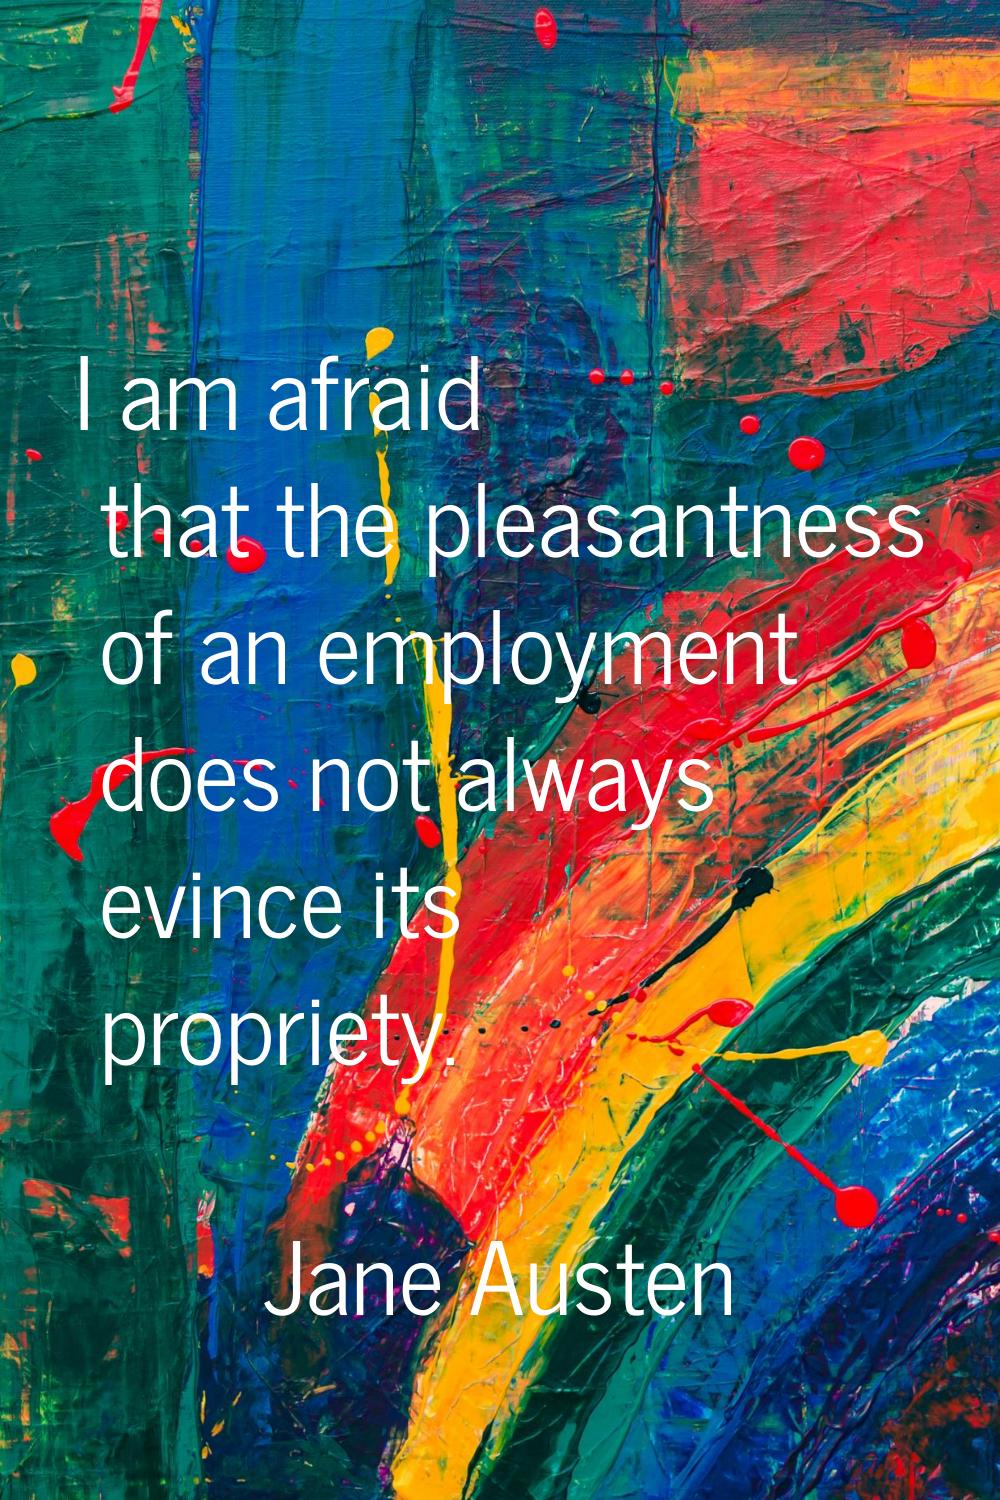 I am afraid that the pleasantness of an employment does not always evince its propriety.